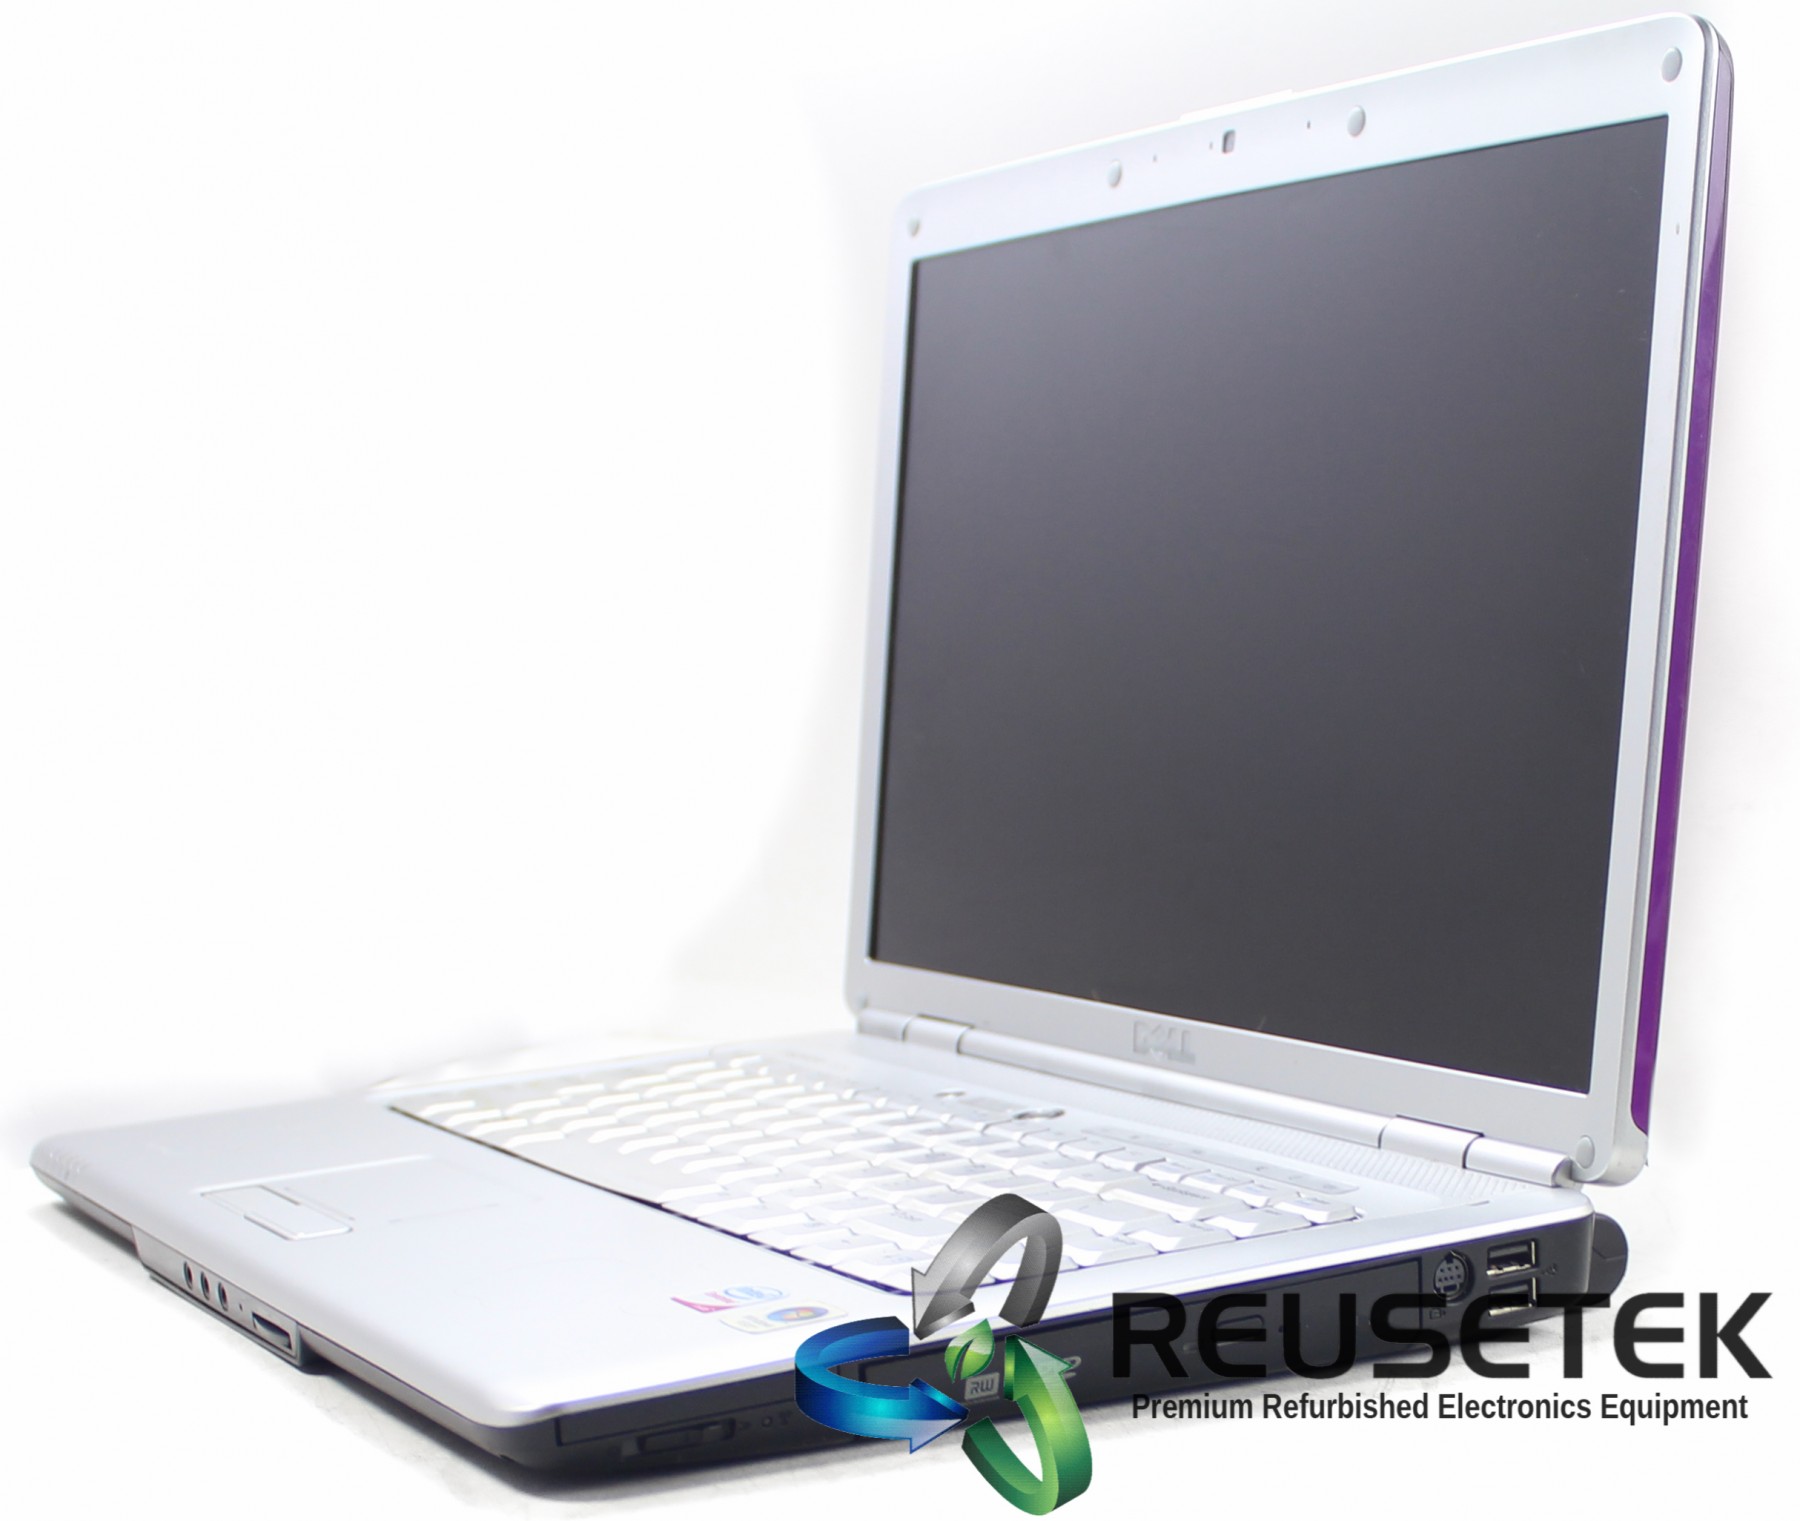 50002434-Dell Inspiron 1525 Laptop (Glossy Purple)-image